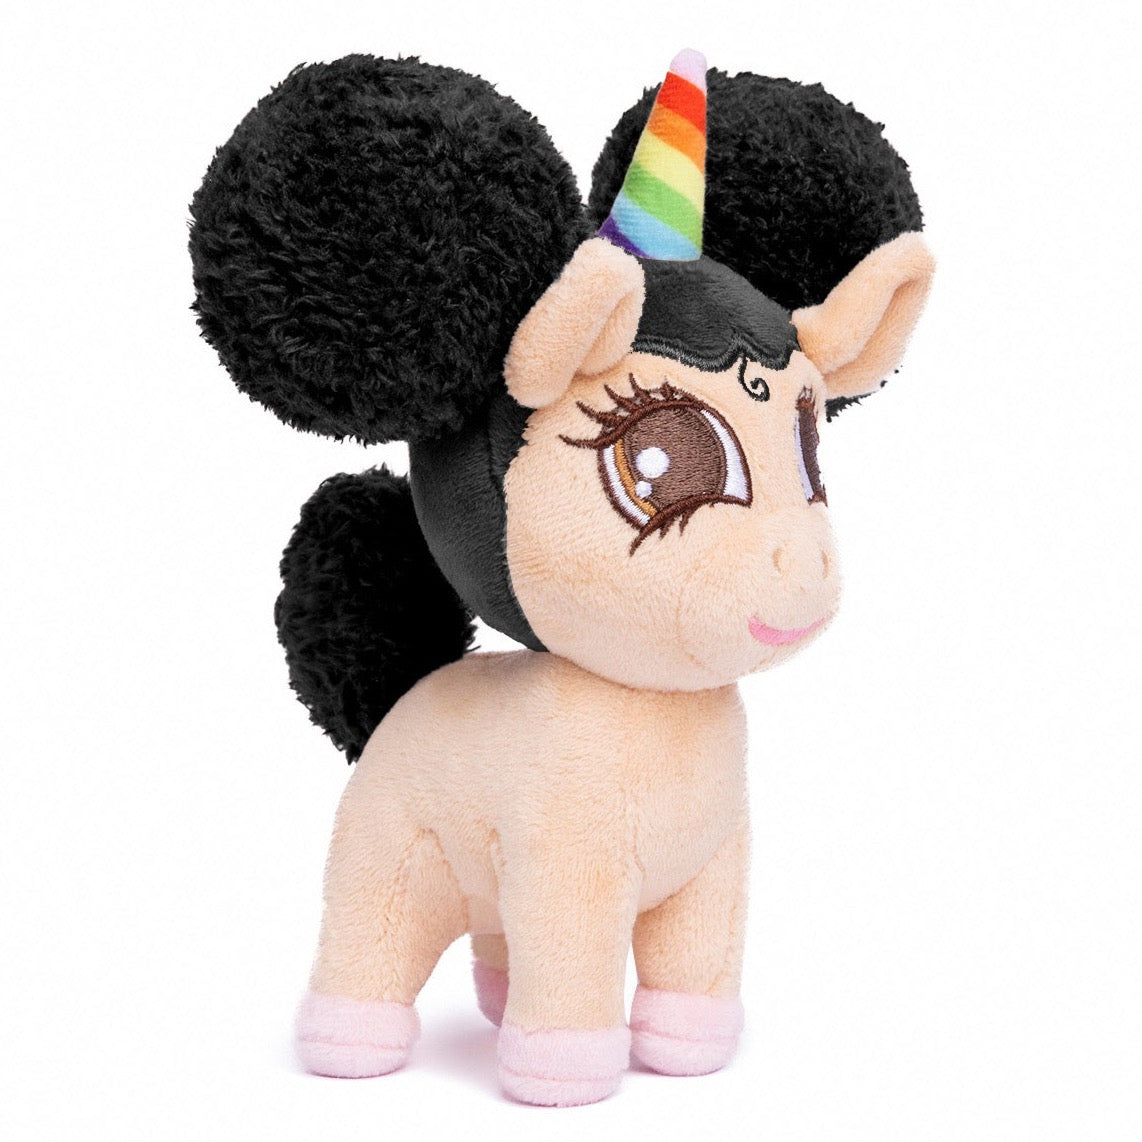 Baby Brandy Unicorn Plush Toy with Afro Puffs (standing) - 6 inch